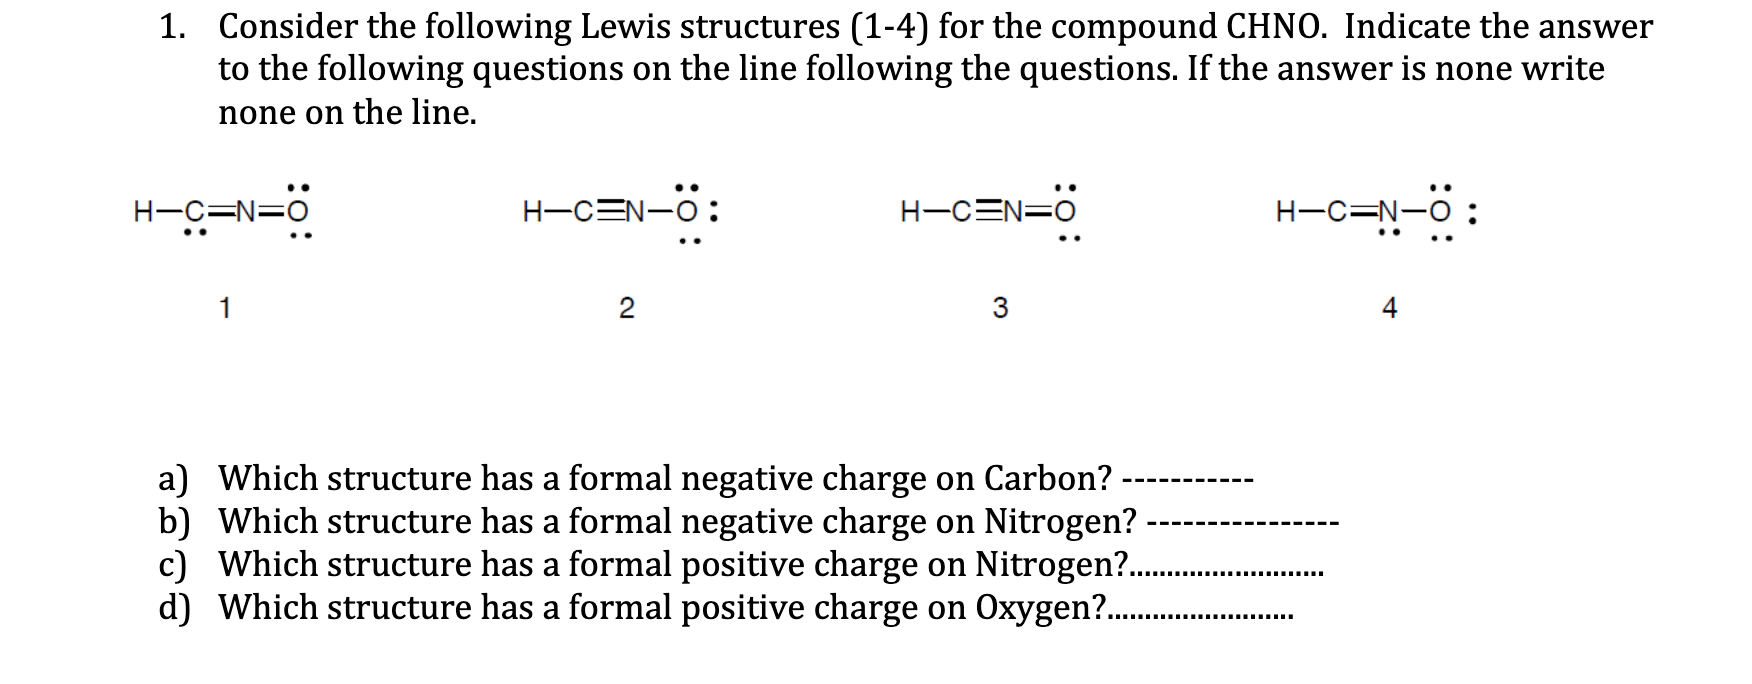 1. Consider the following Lewis structures (1-4) for the compound CHNO. Indicate the answer
to the following questions on the line following the questions. If the answer is none write
none on the line.
H-C=N=0
H-CEN-O:
H-CEN=0
H-C=N-O
o=N=5-H
1
2
3
4
a) Which structure has a formal negative charge on Carbon?
b) Which structure has a formal negative charge on Nitrogen?
c) Which structure has a formal positive charge on Nitrogen?.
d) Which structure has a formal positive charge on Oxygen? .
